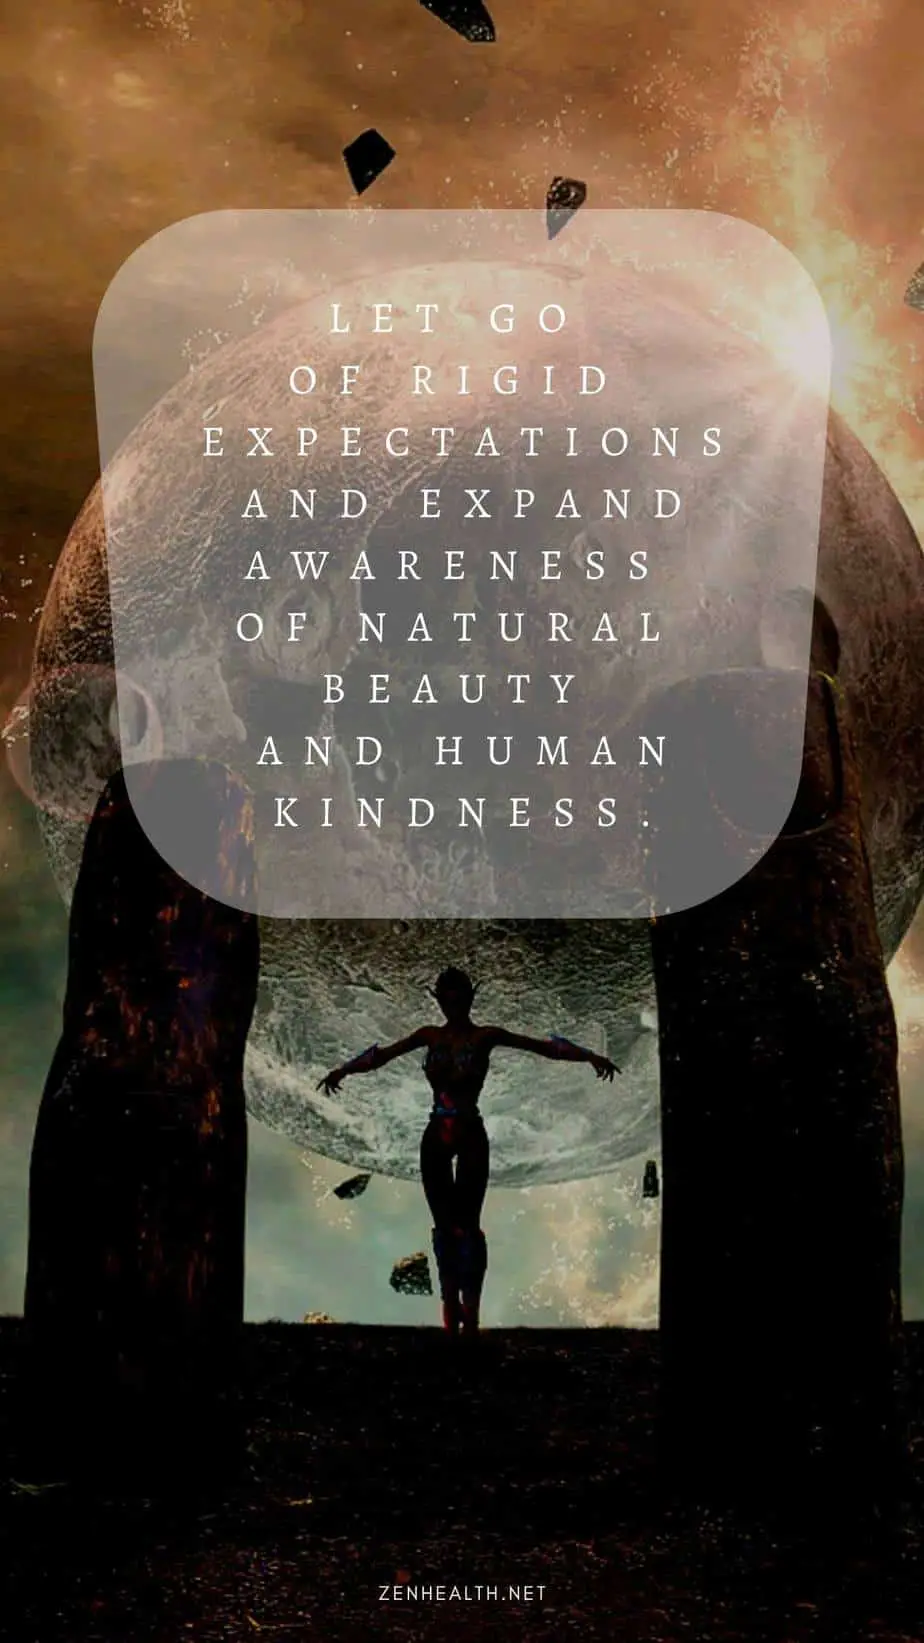 Let go of rigid expectations and expand awareness of natural beauty and human kindness.